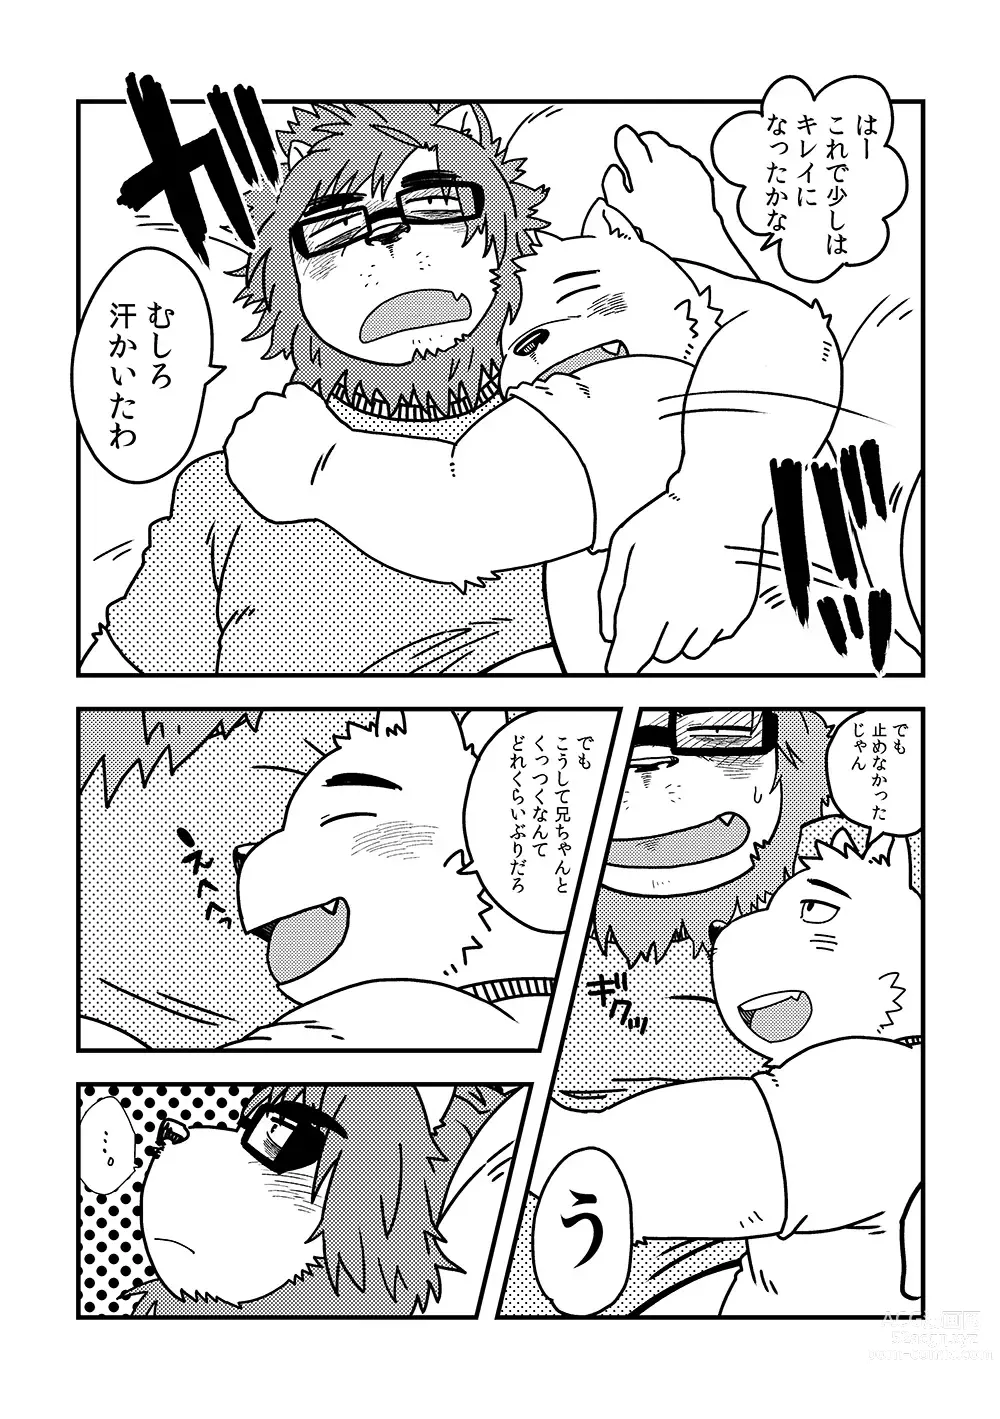 Page 18 of doujinshi Bottles Brothers